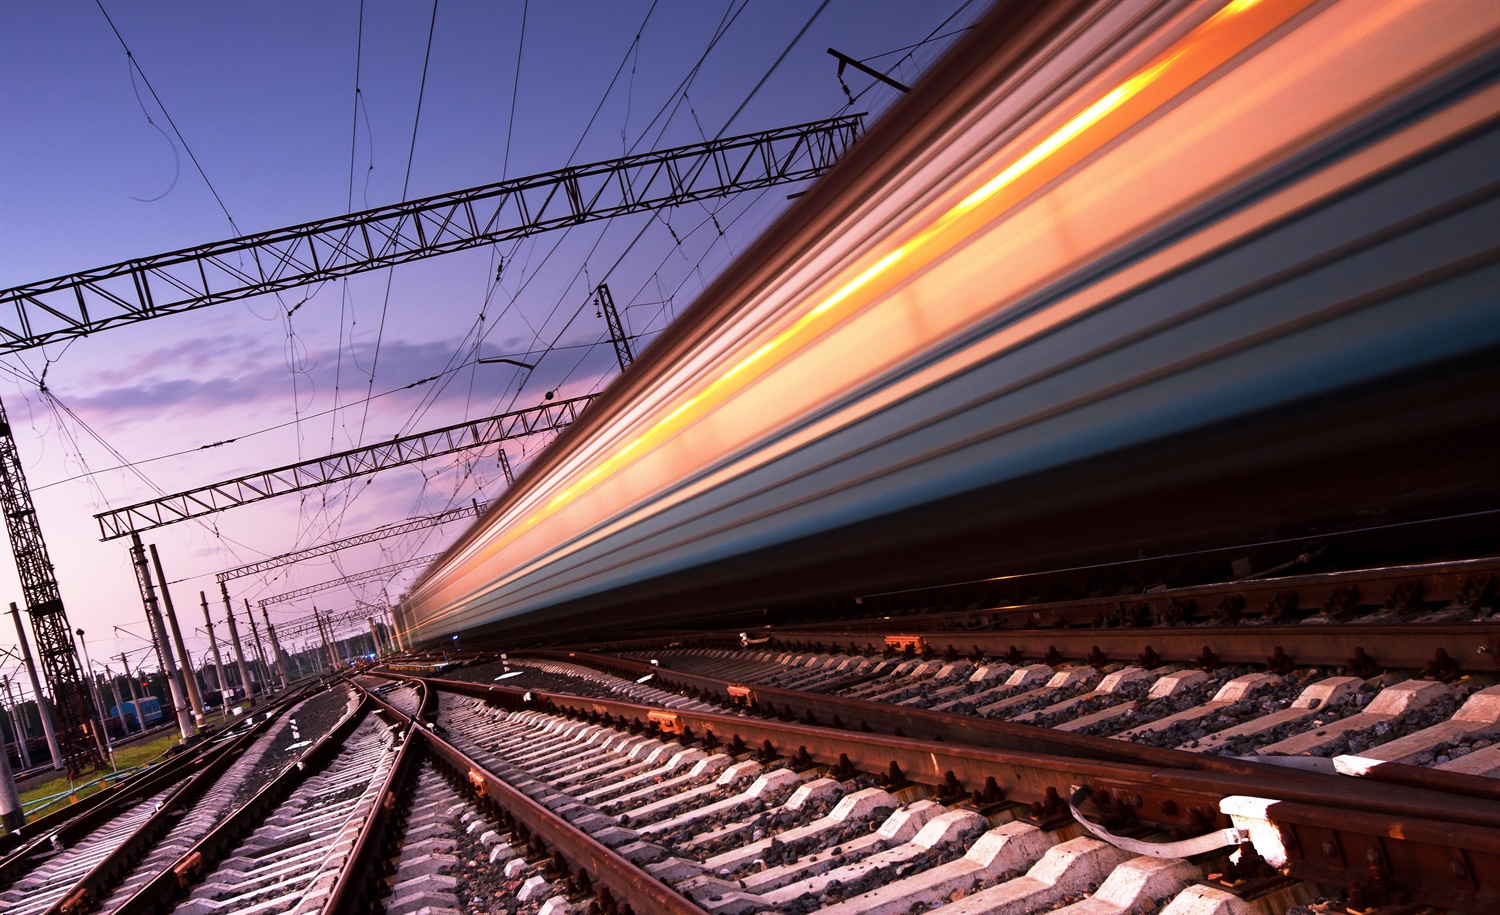 120 NPH leaders call for HS2 to be delivered in full